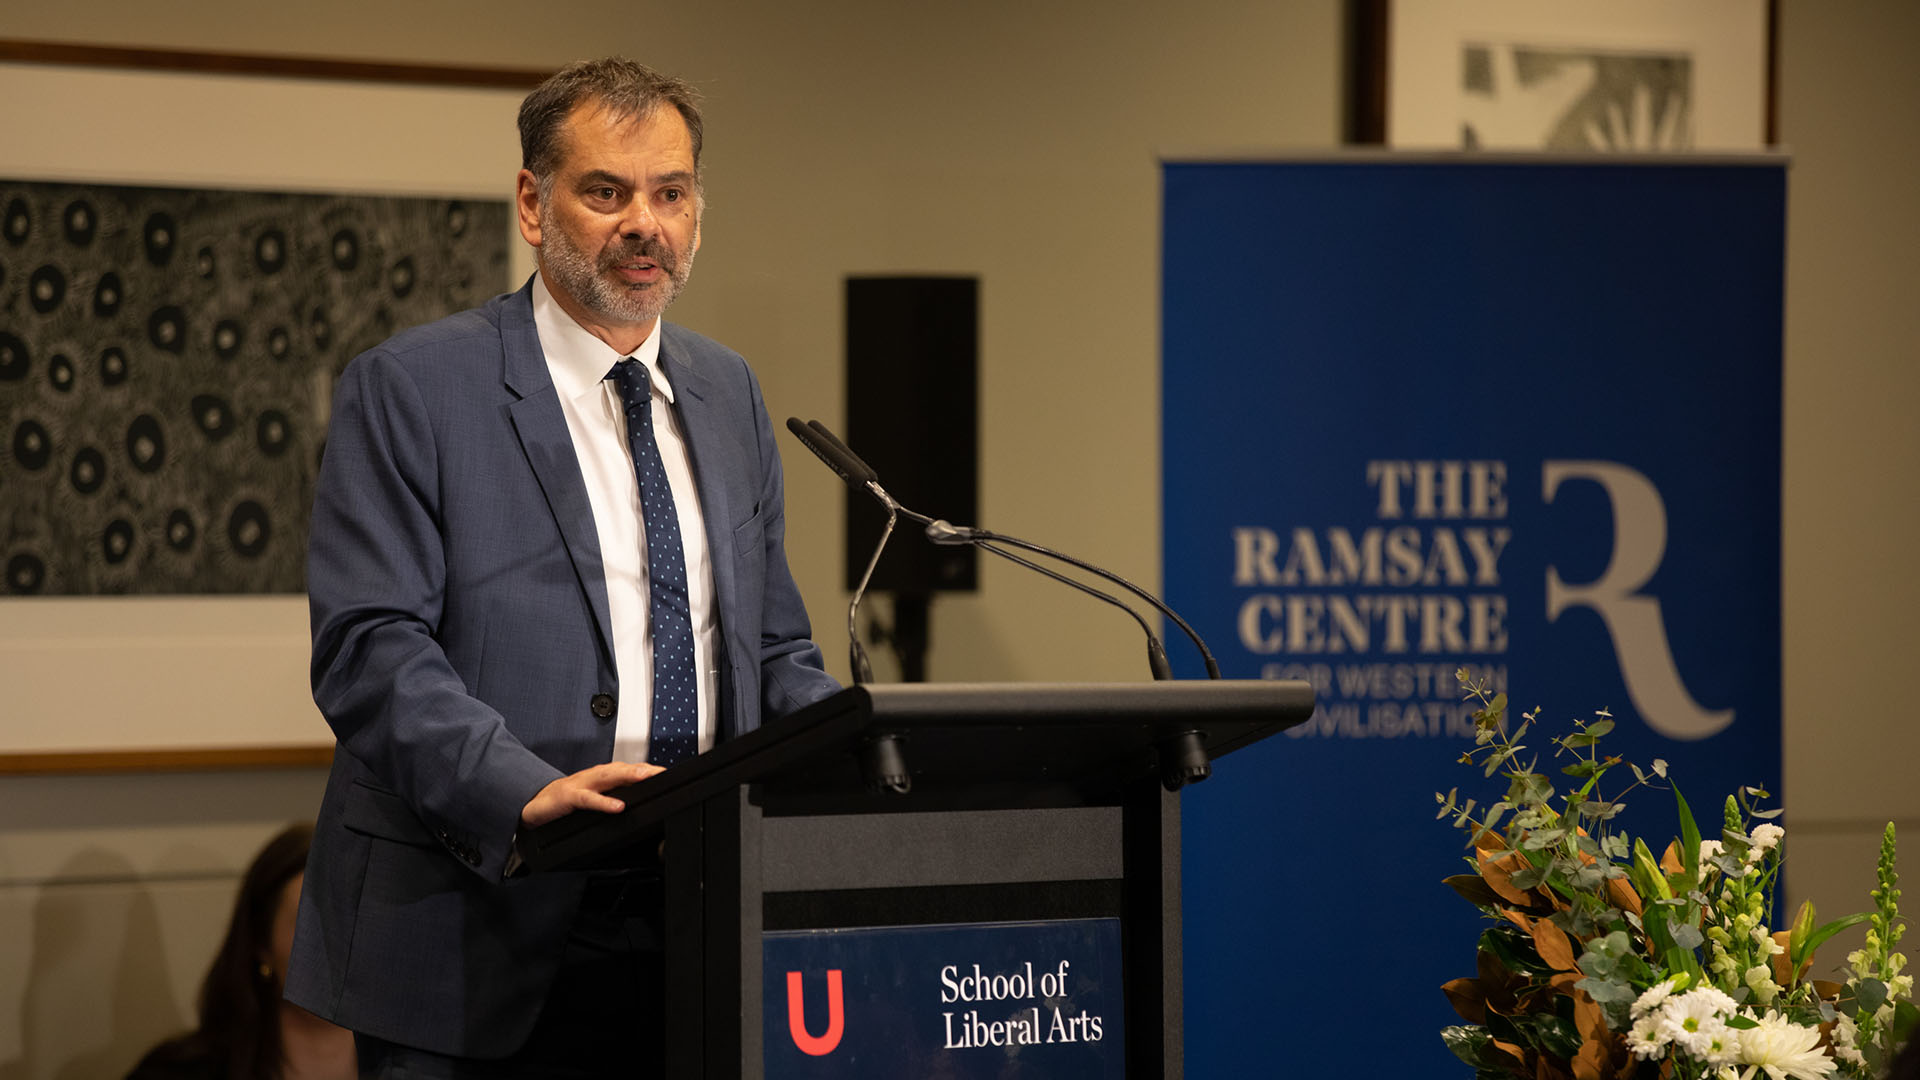 University of Wollongong Deputy Chancellor Mr Warwick Shanks speaking at the 2022 UOW Ramsay Centre Dinner